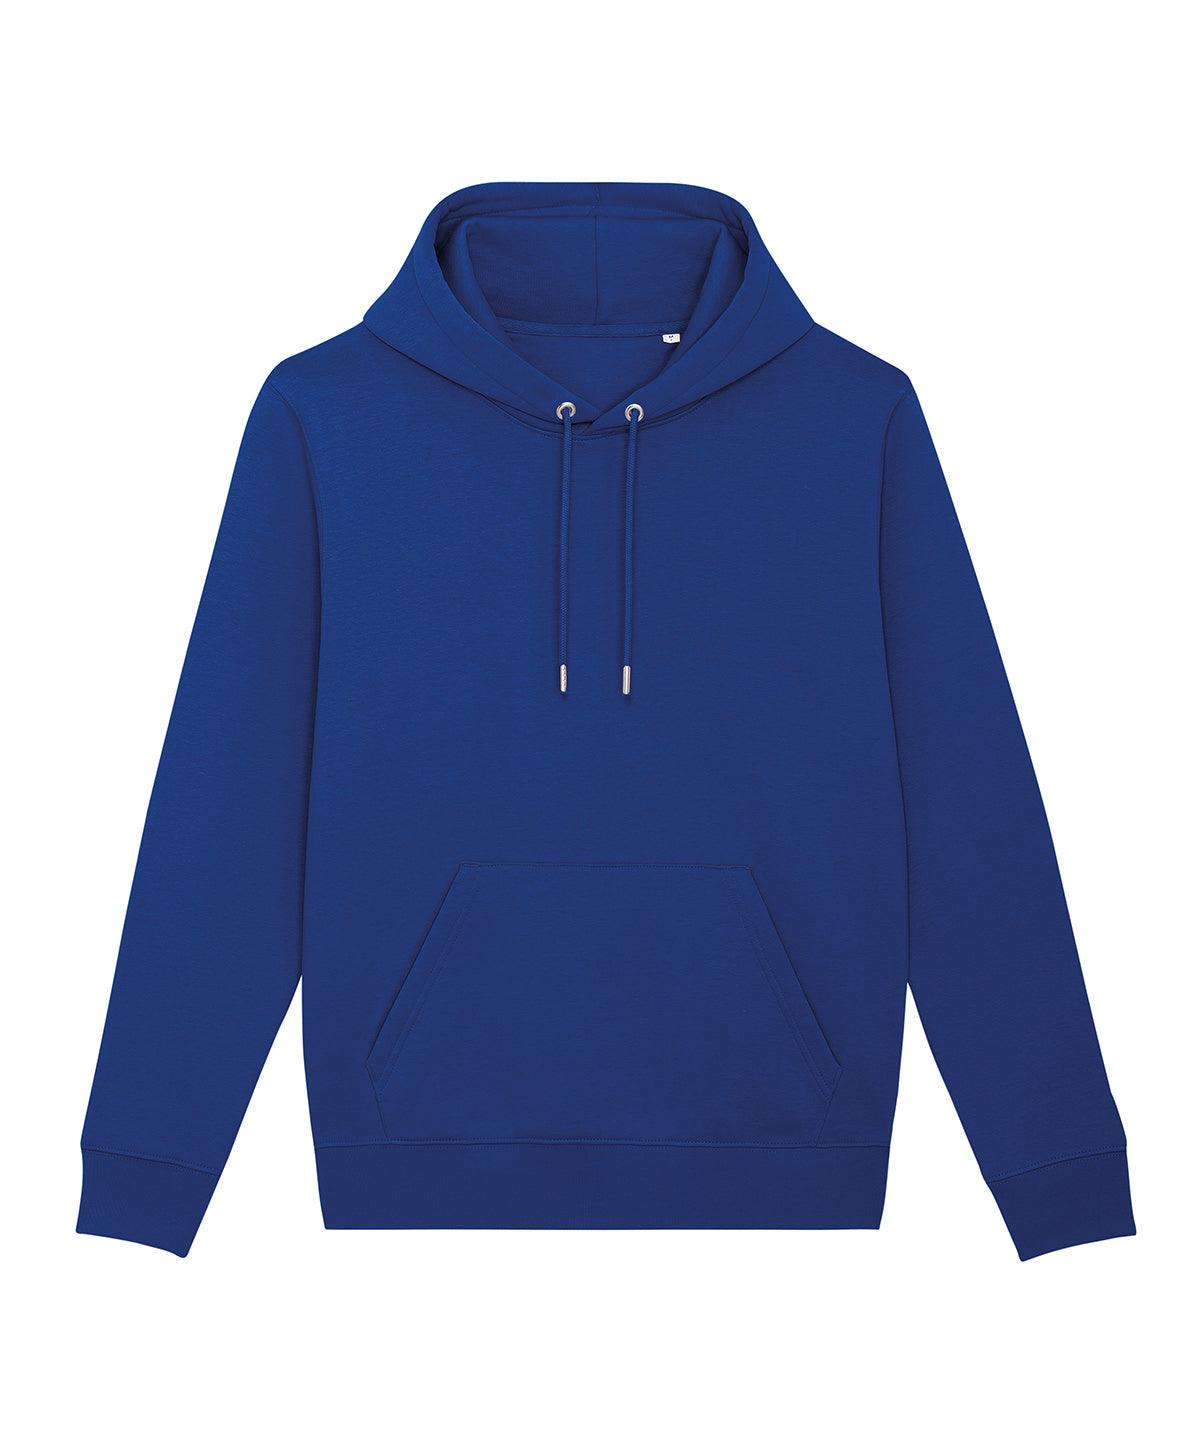 Worker Blue*† - Unisex Cruiser iconic hoodie sweatshirt (STSU822) Hoodies Stanley/Stella Co-ords, Conscious cold weather styles, Exclusives, Freshers Week, Home of the hoodie, Hoodies, Lounge Sets, Merch, Must Haves, New Colours for 2023, Organic & Conscious, Raladeal - Recently Added, Raladeal - Stanley Stella, Recycled, Stanley/ Stella, Trending Loungewear Schoolwear Centres